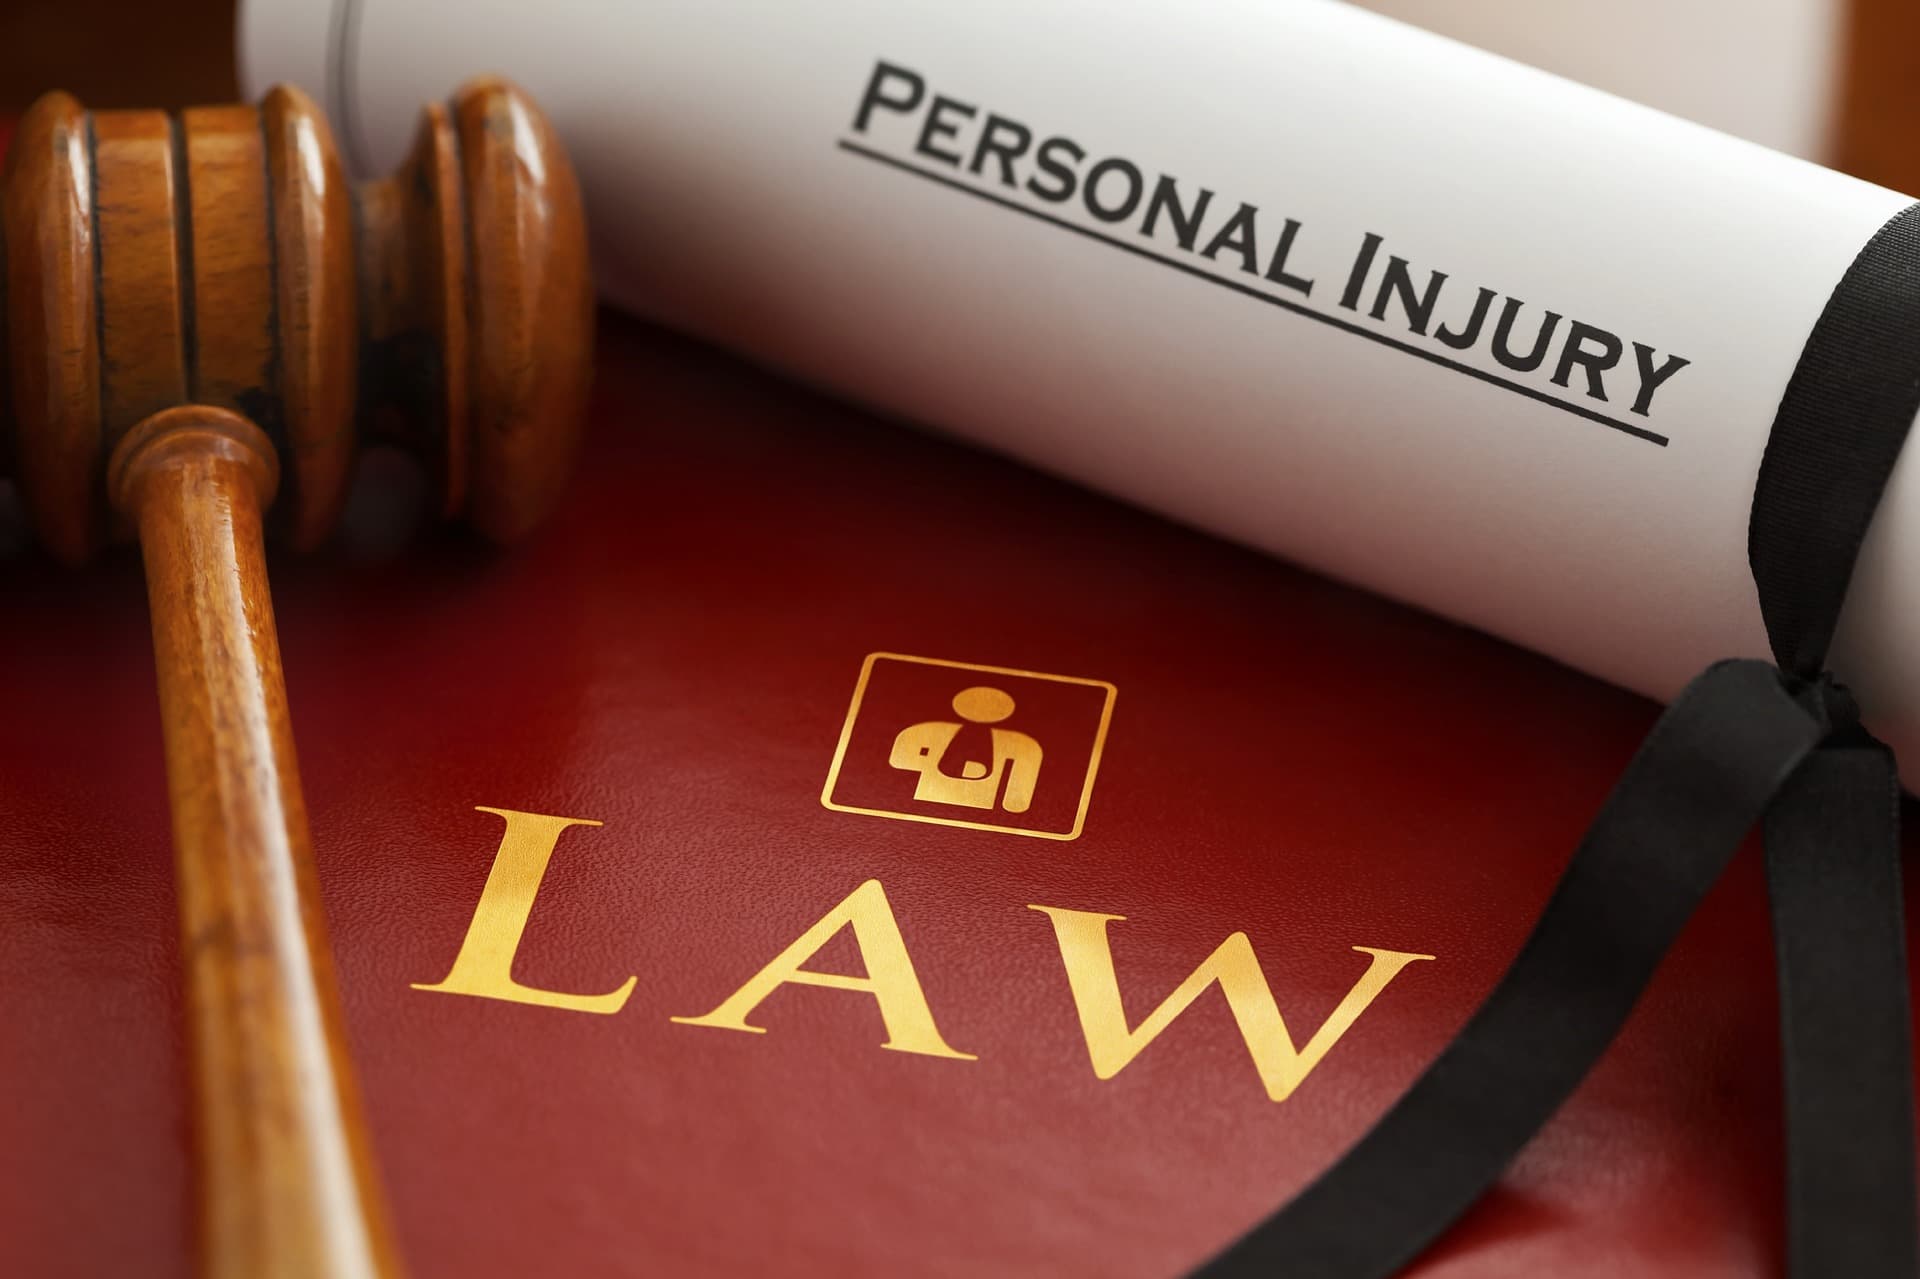 How To Make The Best Of Your Personal Injury Case With The Right Attorney